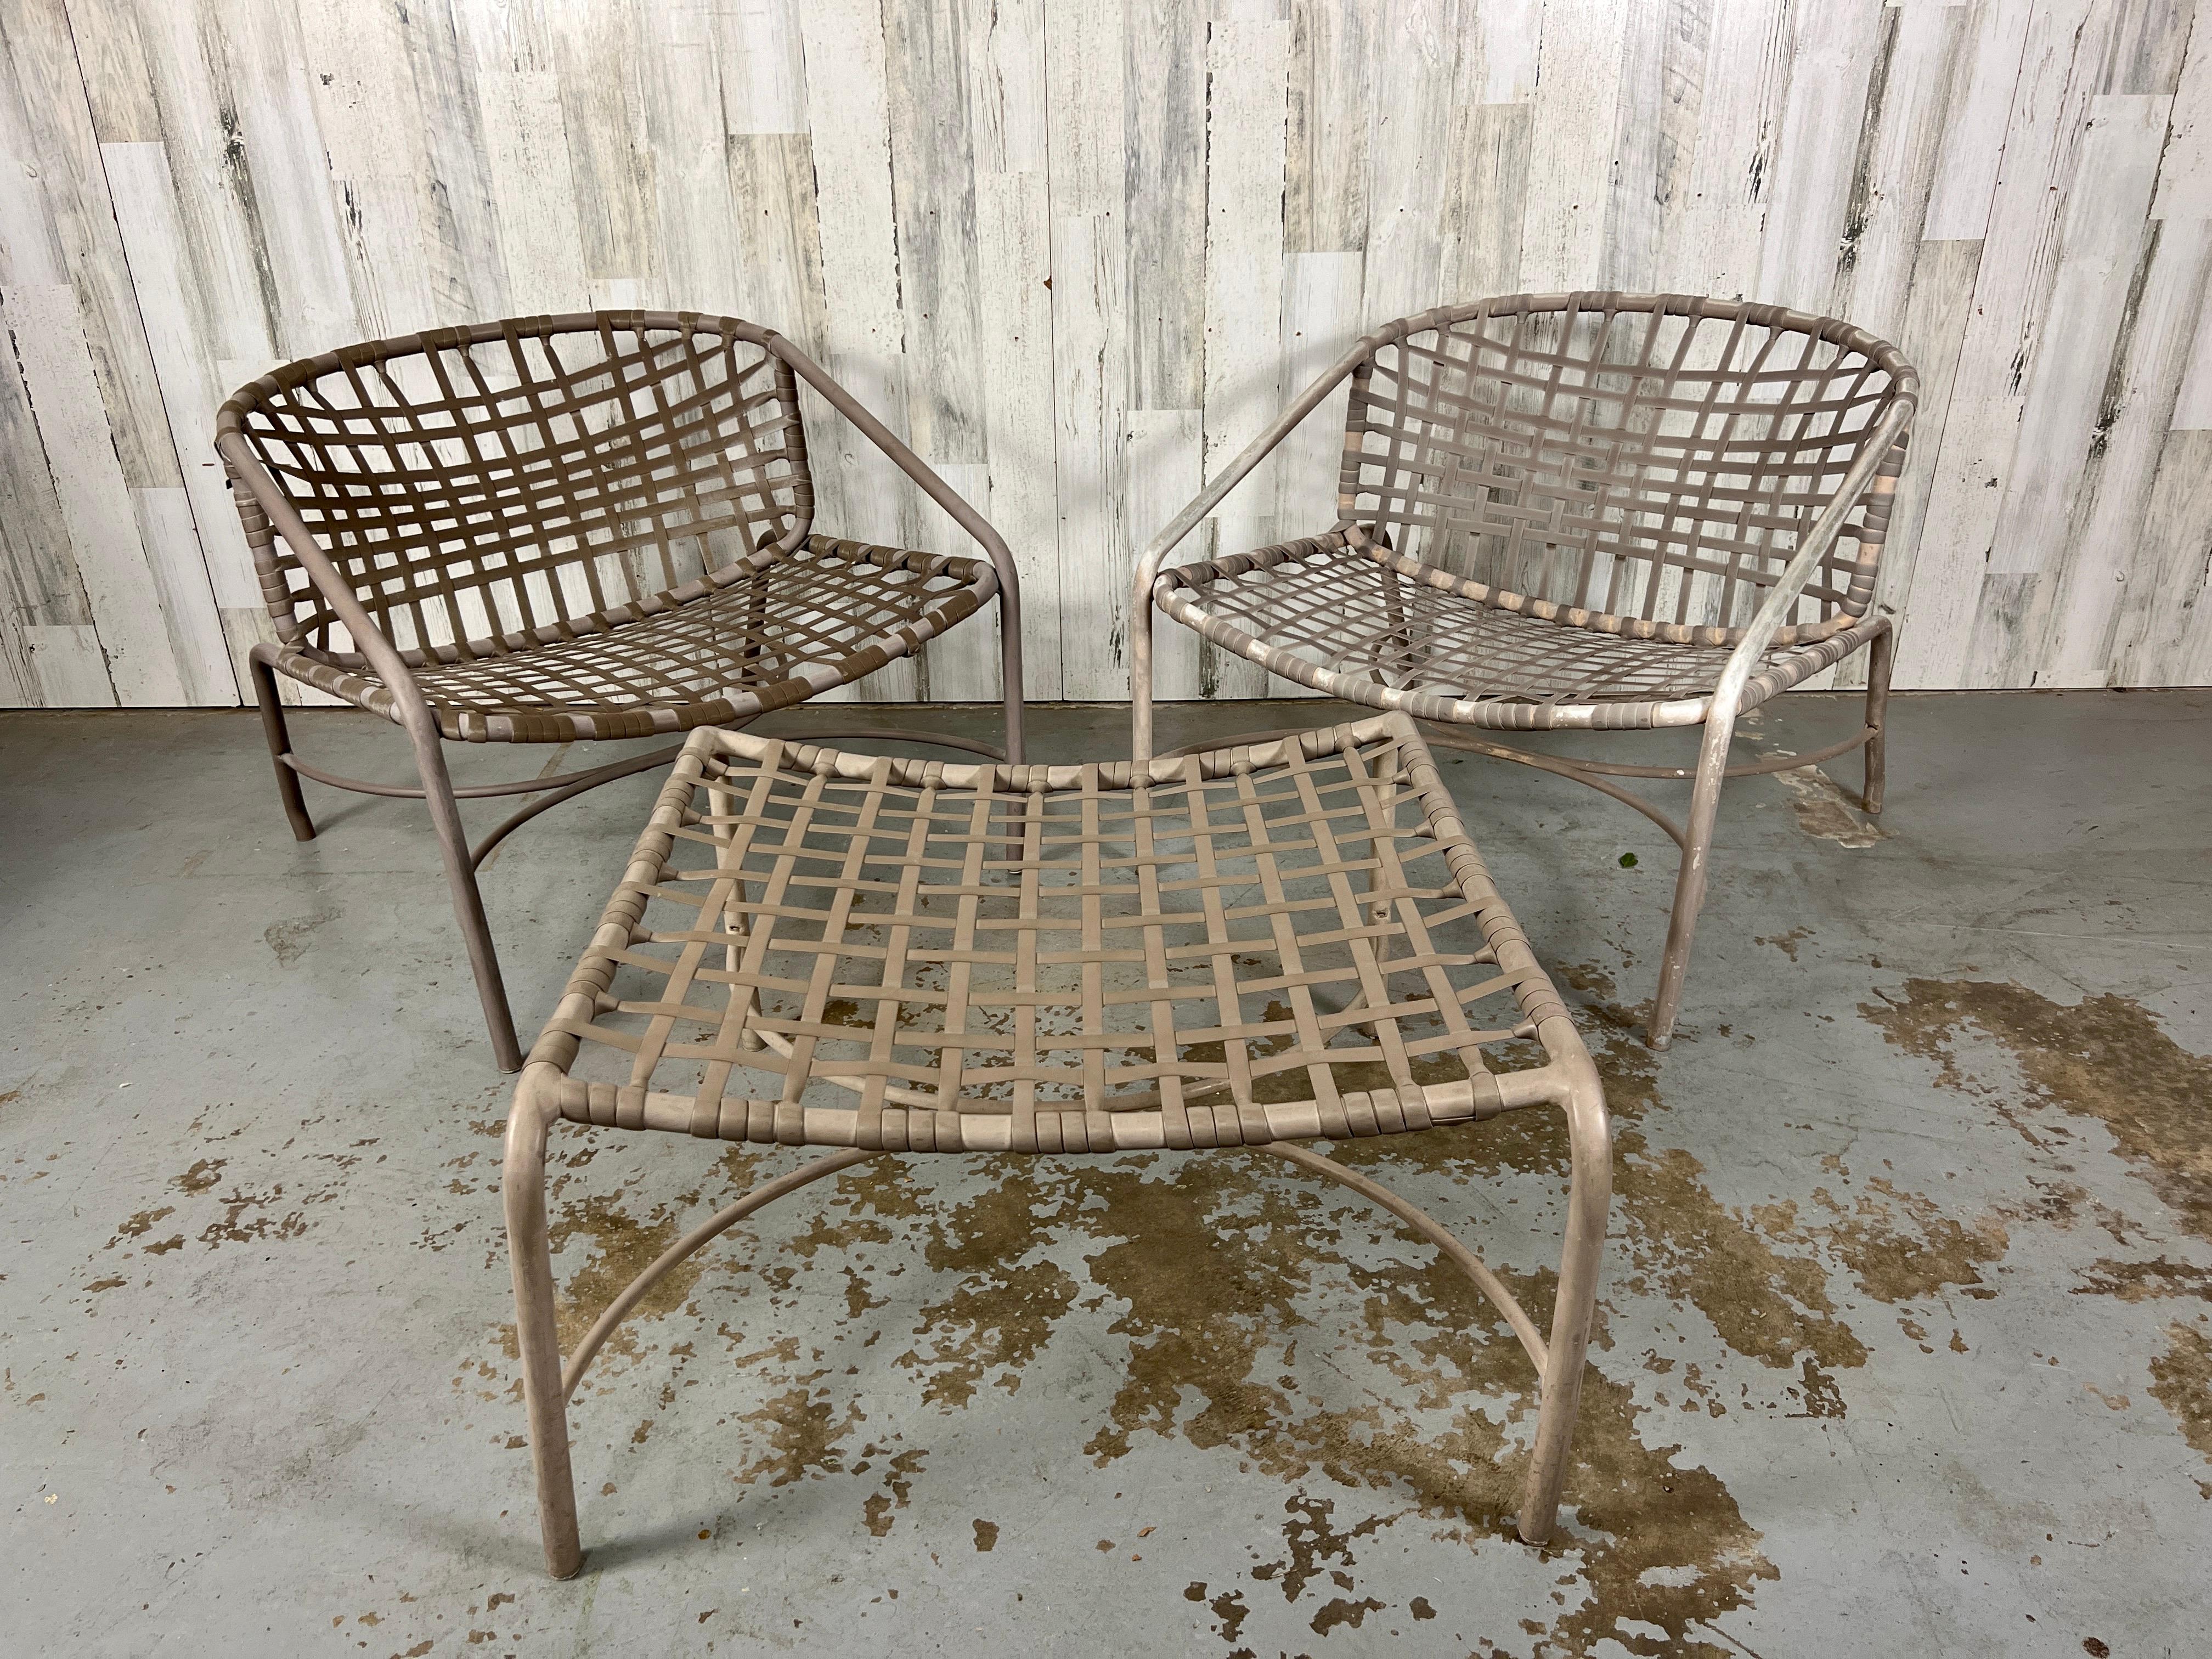 Tadao Inouye designed for Brown Jordan Kantan Set of Patio Chairs with Ottoman. The chair straps are in good condition. While the entire set is functional, you might consider having it re-powder coated and strapped for a refreshed look.
Ottoman